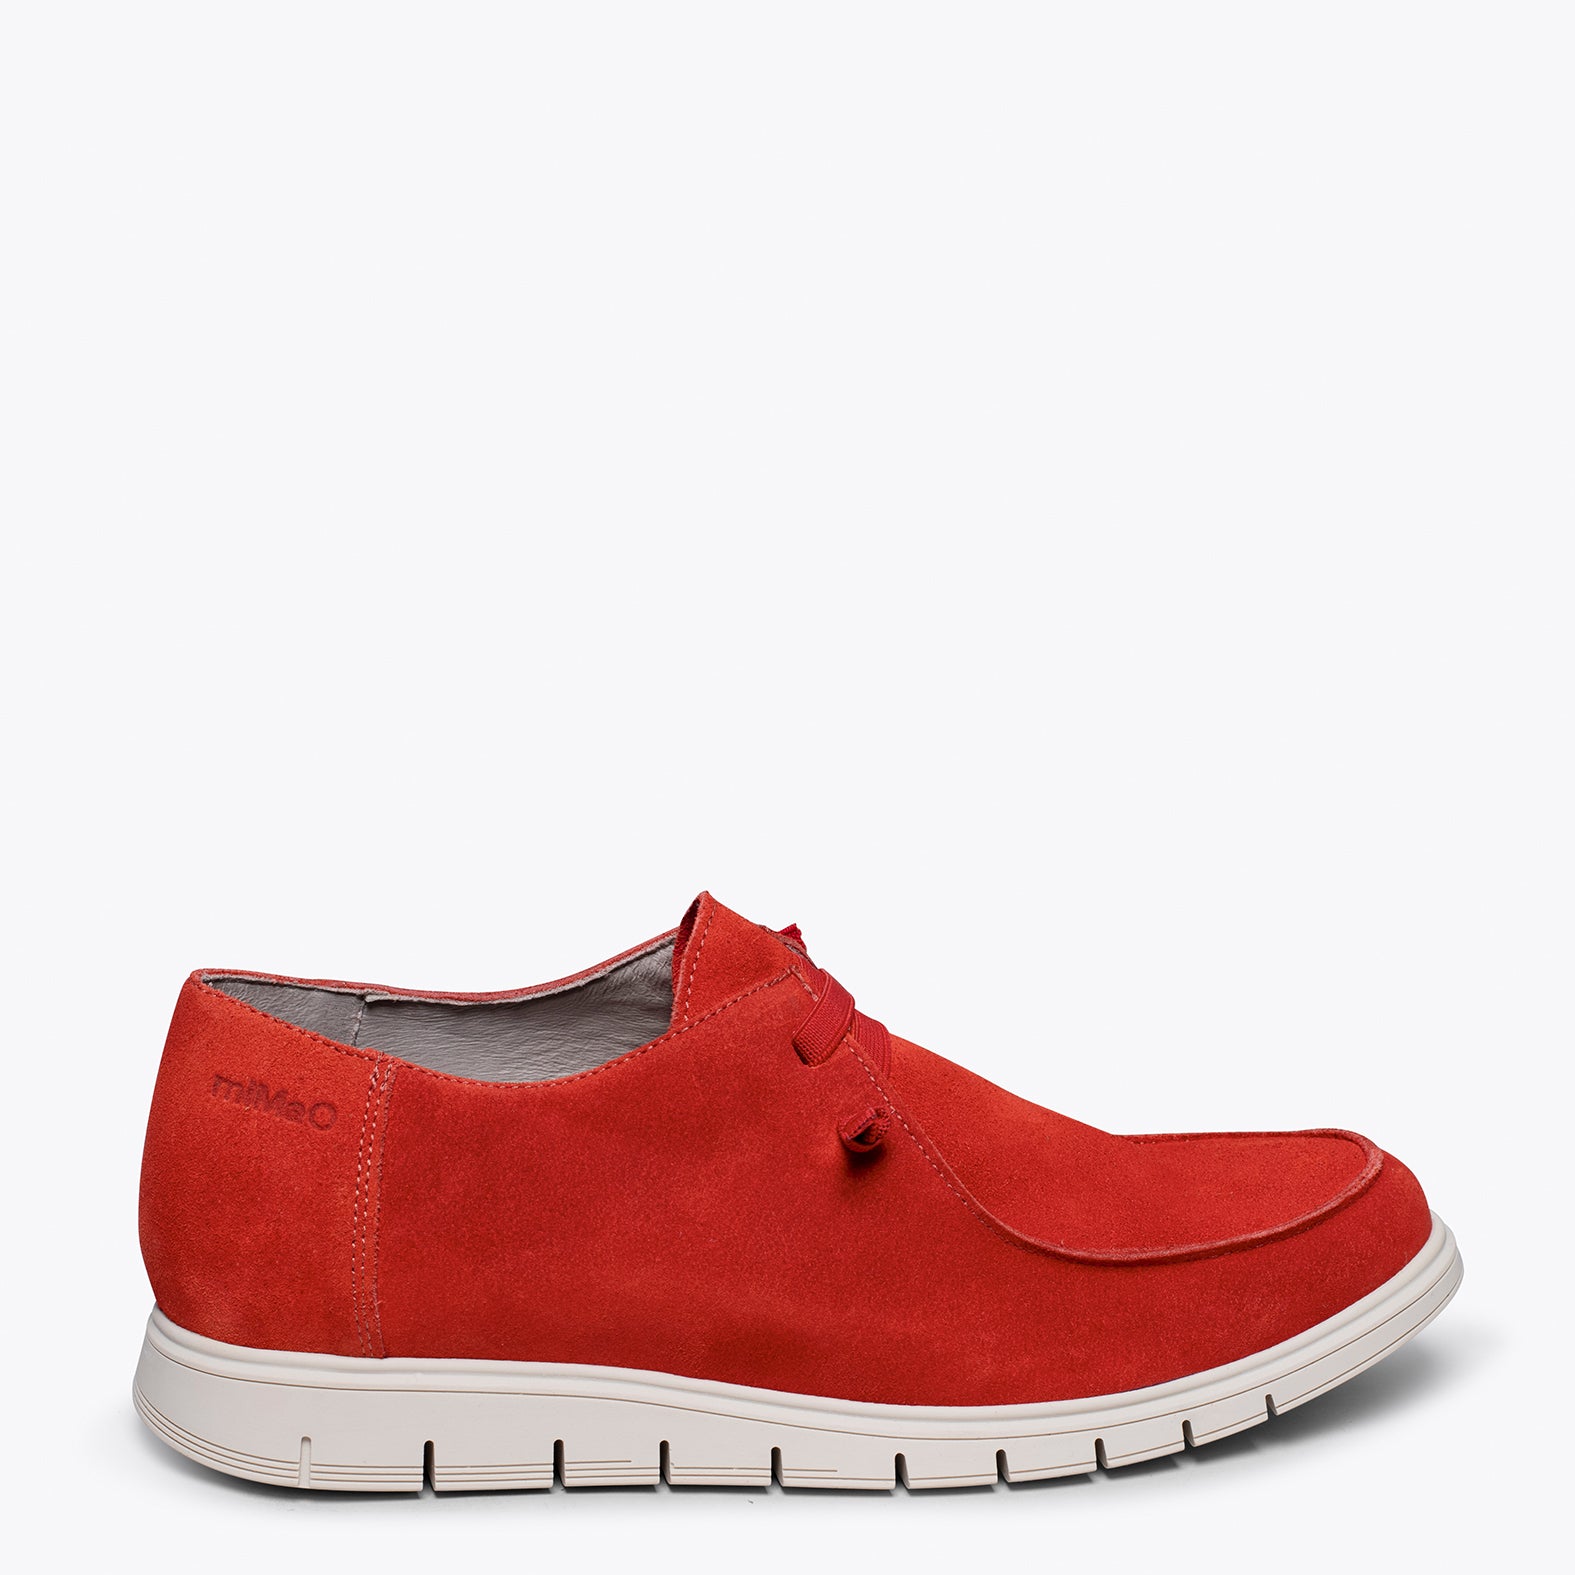 DUBLIN - Chaussures casual ROUGE pour homme